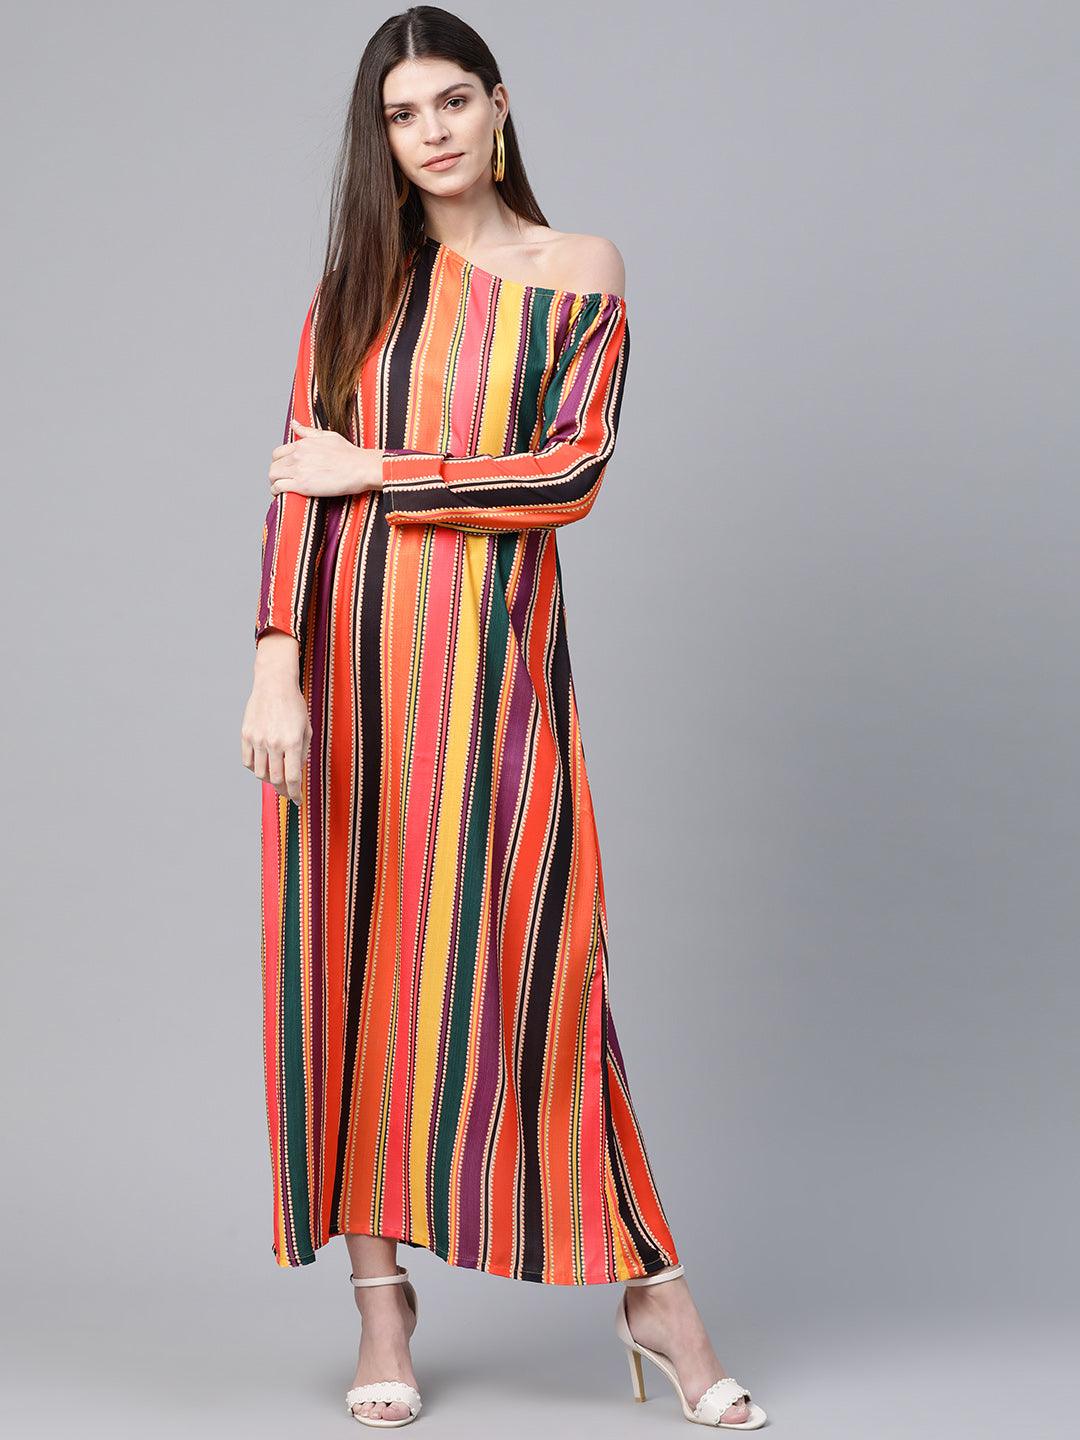 Pink Candy Striped Maxi Dress (Fully Stitched) - Znxclothing